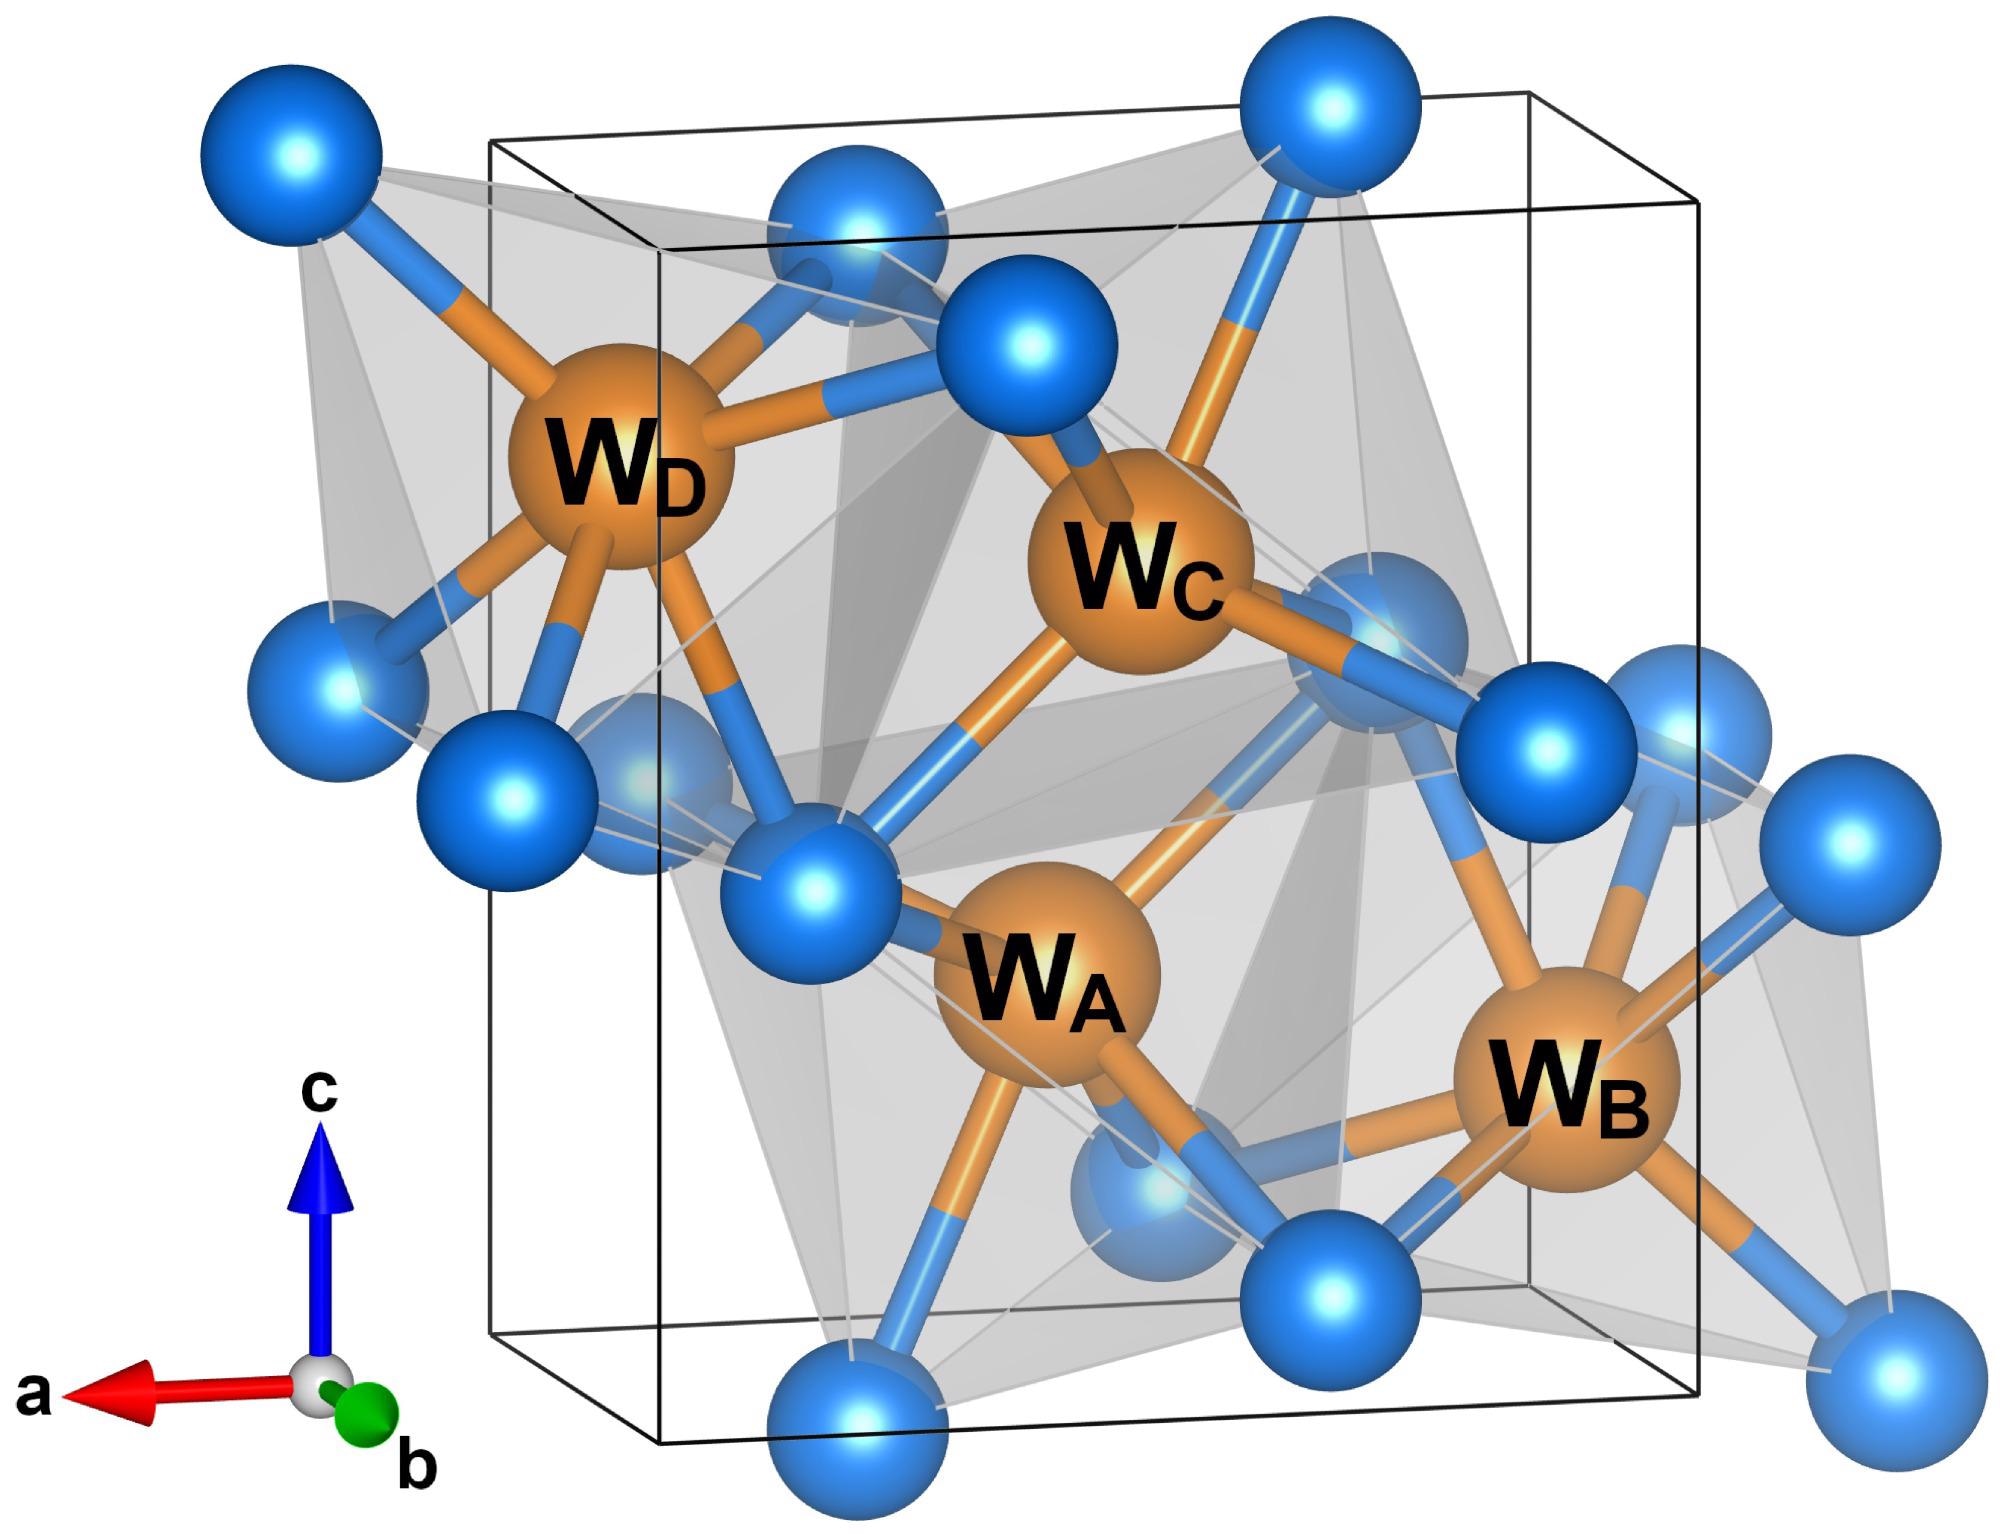 The orthorhombic crystal structure of tungsten phosphide WP with space group Pnma. Orange and blue spheres indicate W and P ions, respectively, with nonequivalent lattice positions of the W ions labeled as WA, WB, WC, WD. Face-sharing WP6 octahedra are shaded in gray.